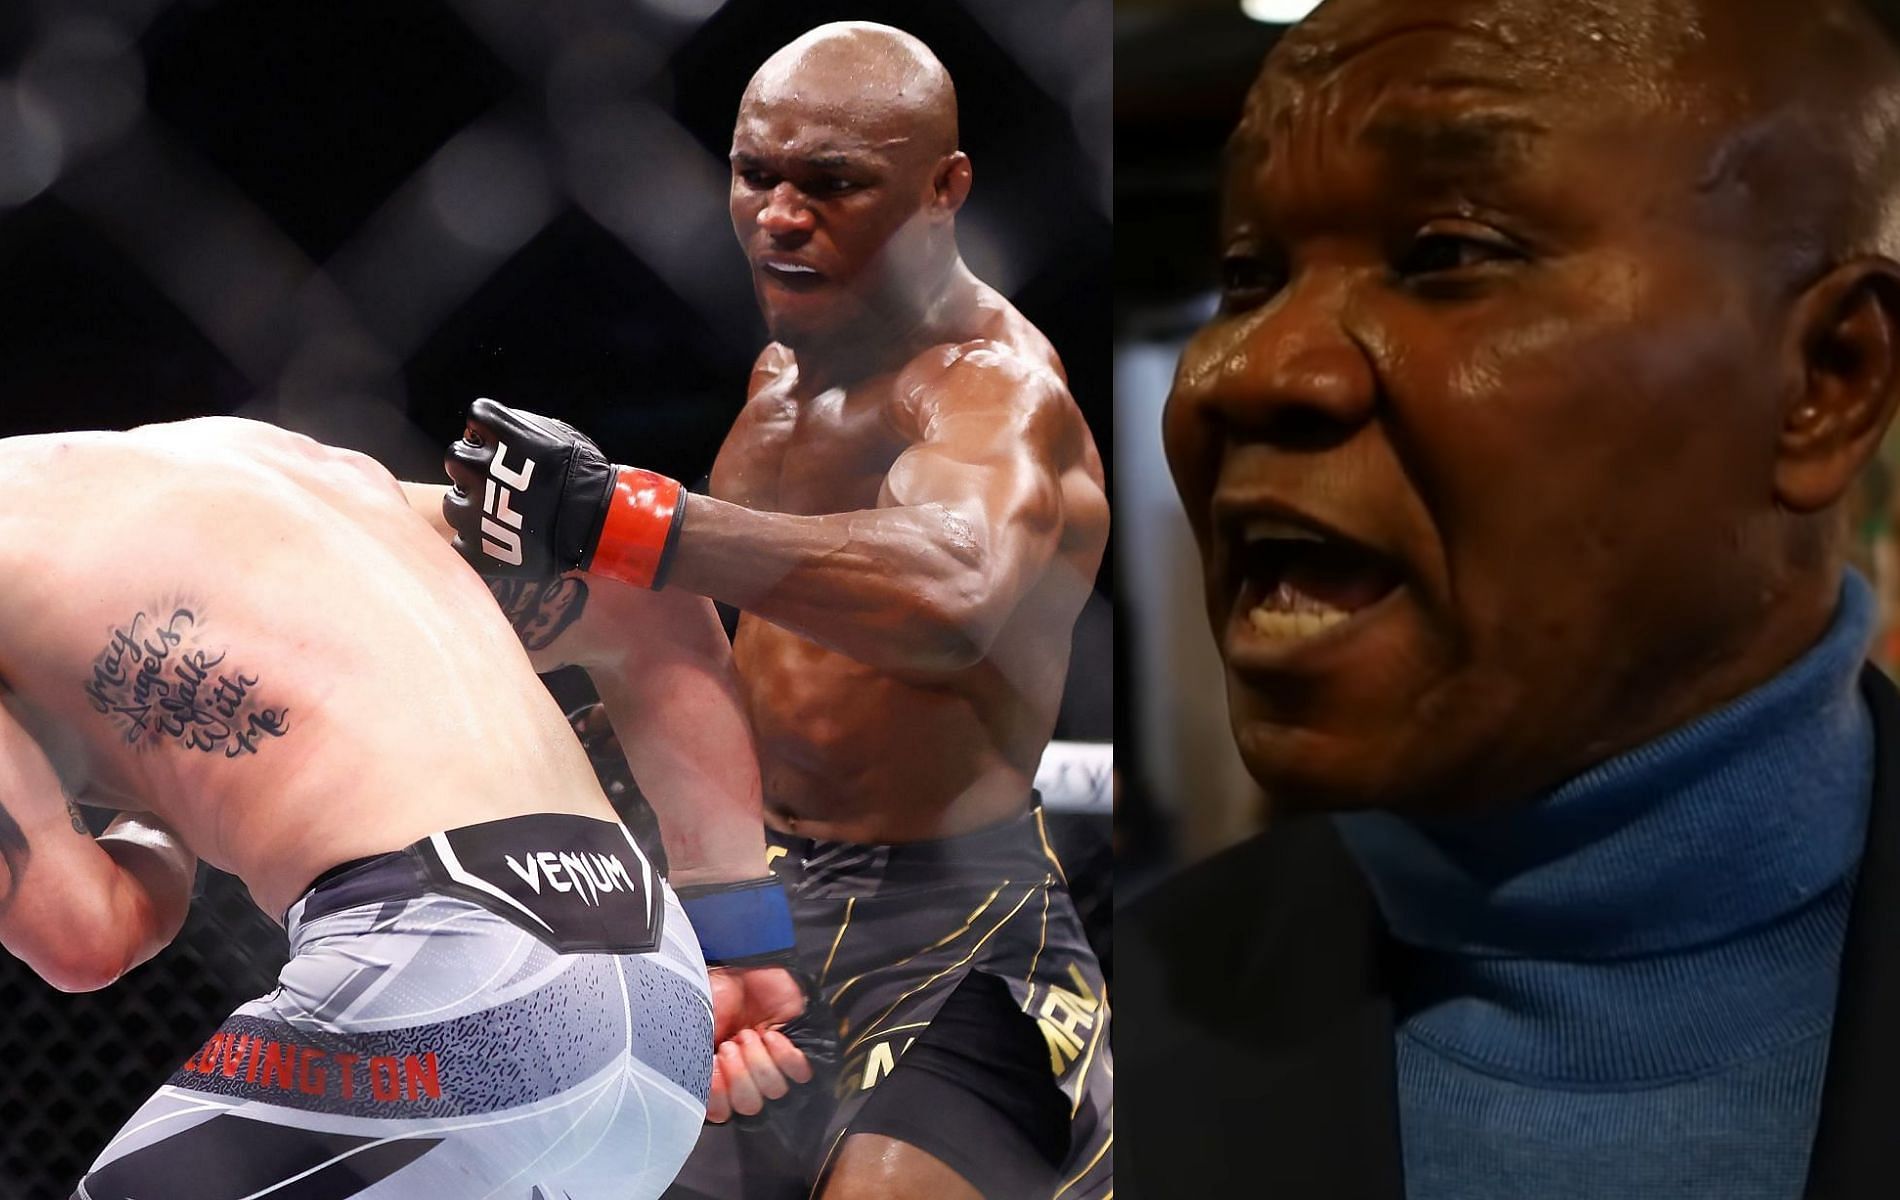 Kamaru Usman defeated Colby Covington at UFC 268 (right image credit: Michael Bisping YouTube channel).